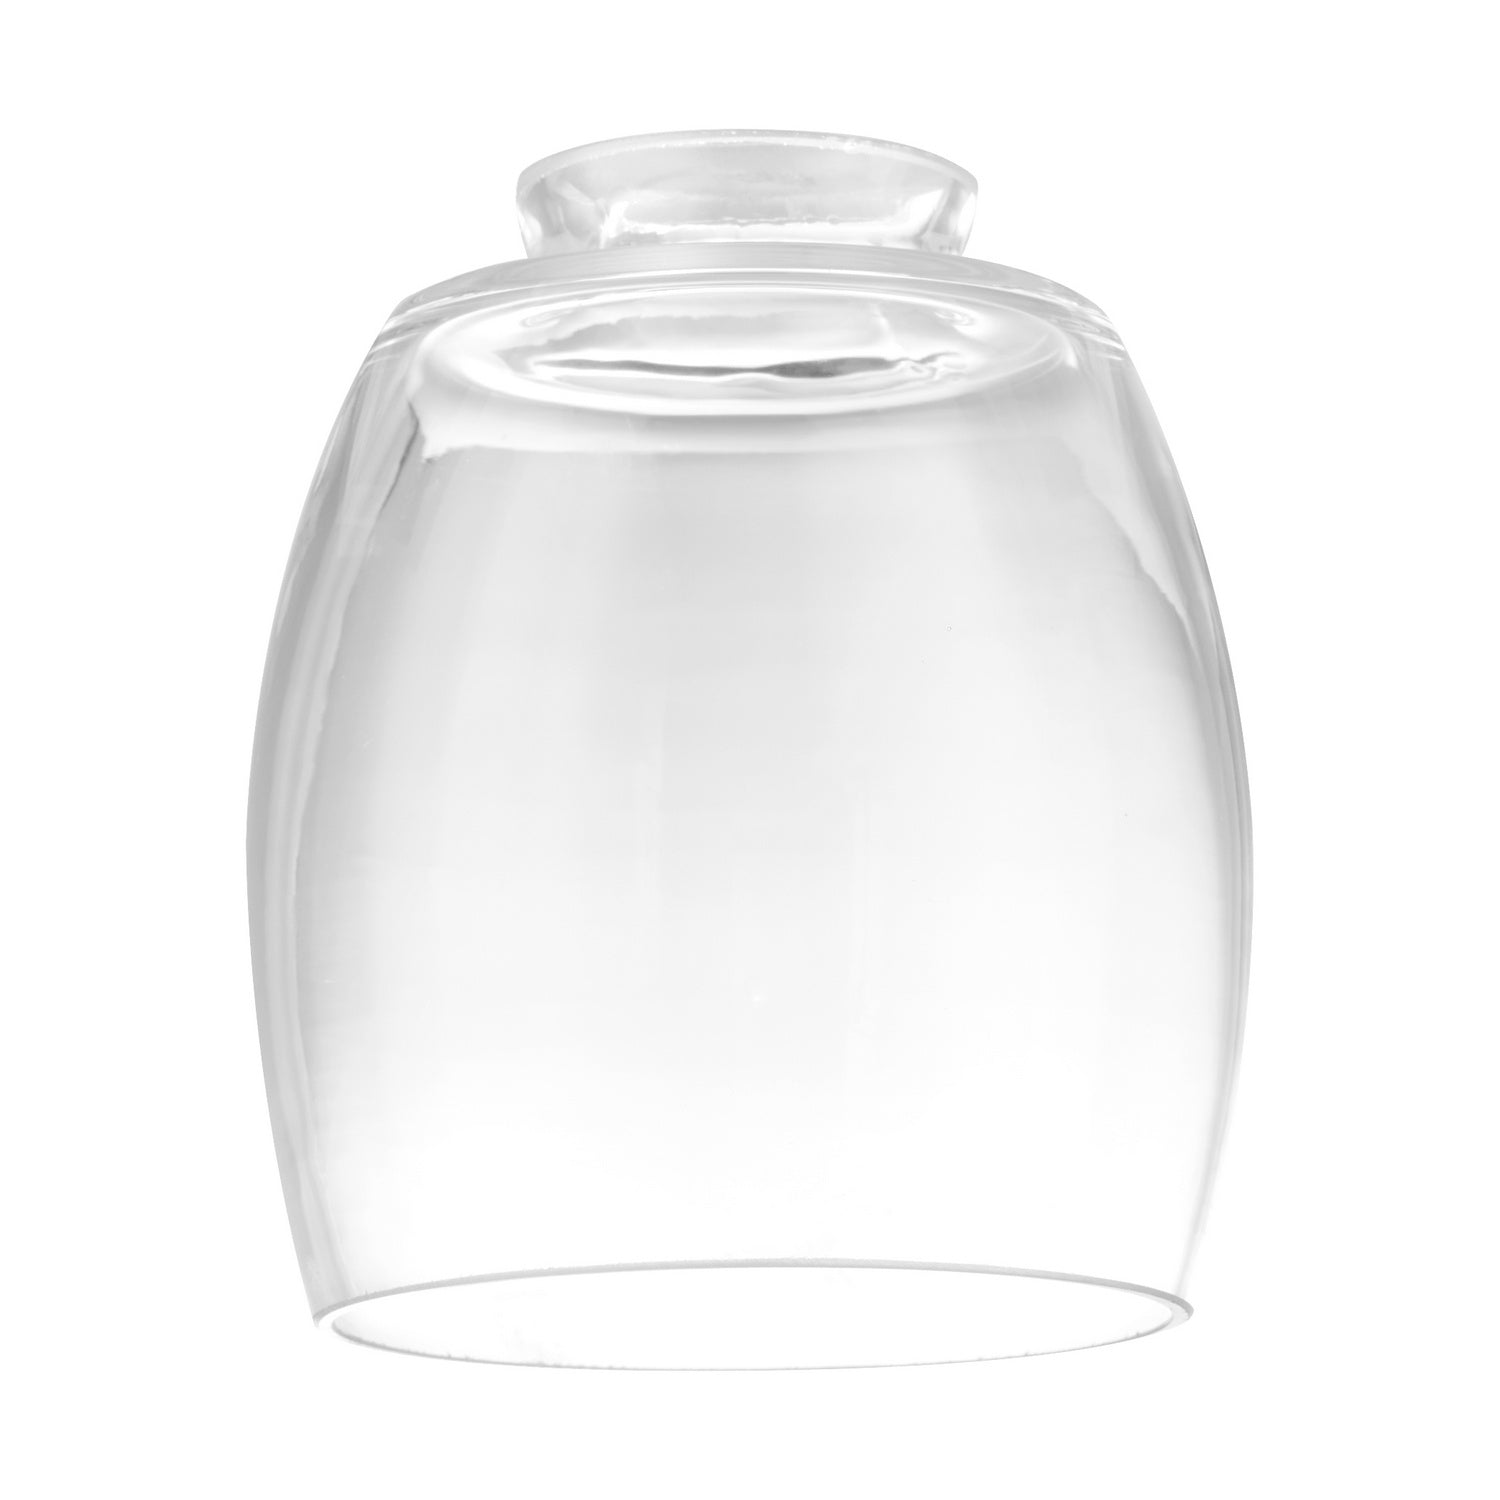 Quorum - 2743 - Glass - Glass Series - Clear